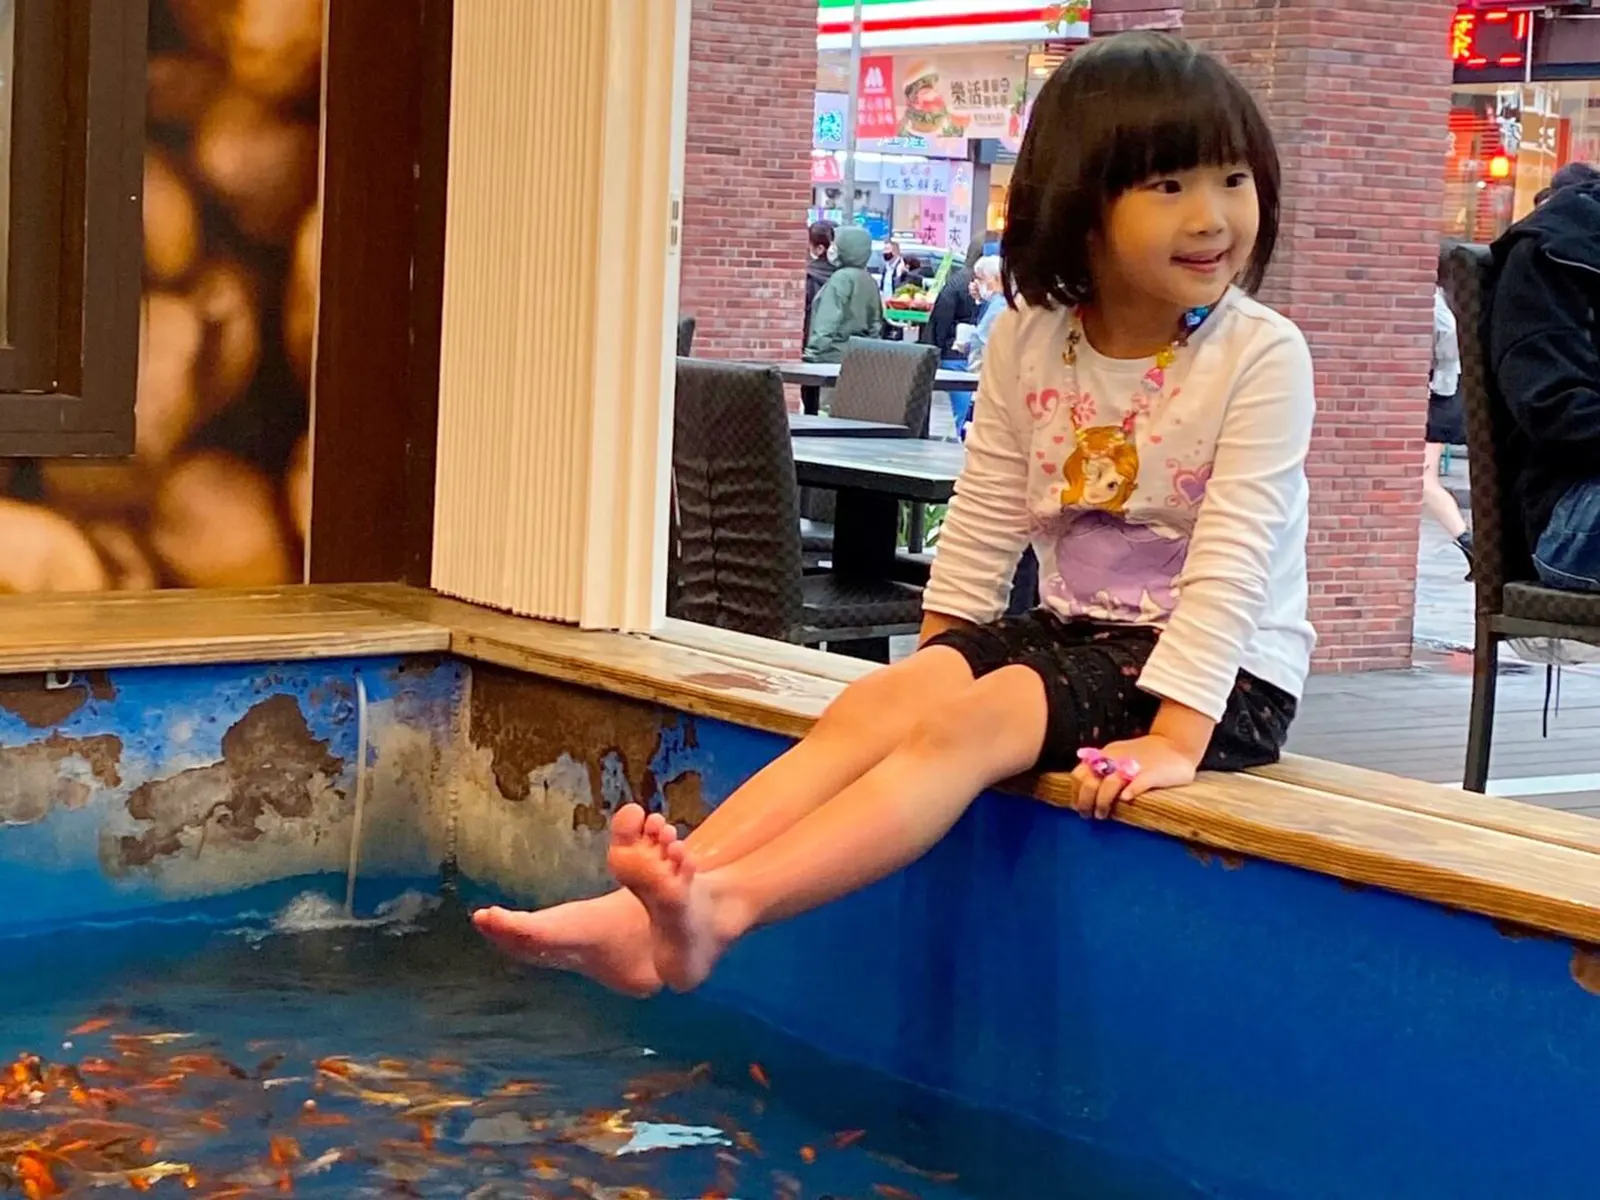 A child is doing the foot bath